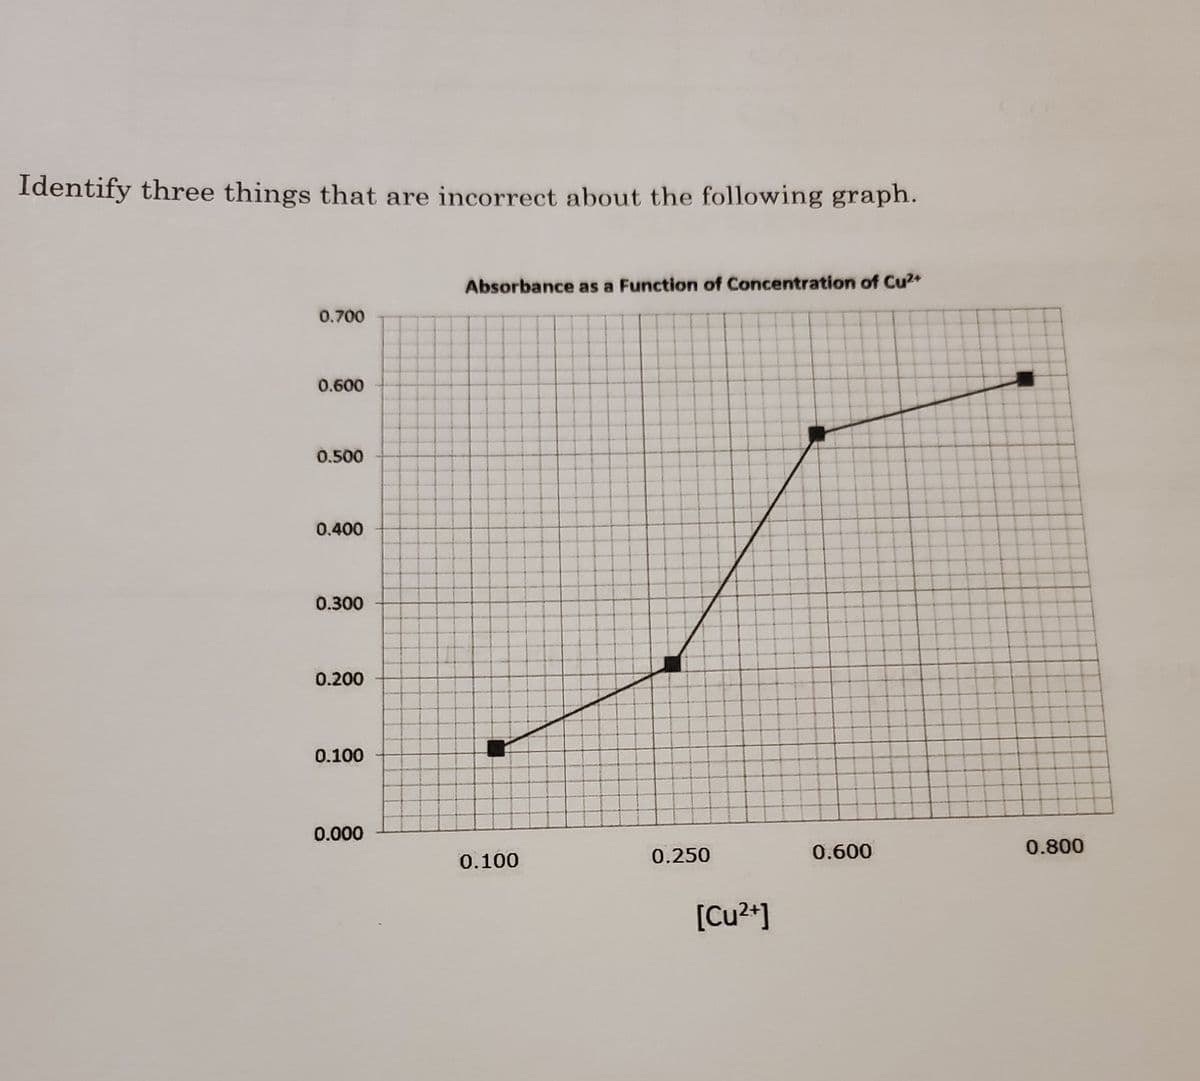 Identify three things that are incorrect about the following graph.
Absorbance as a Function of Concentration of Cu2+
0.700
0.600
0.500
0.400
0.300
0.200
0.100
0.000
0.250
0.600
0.800
0.100
[Cu2+]
